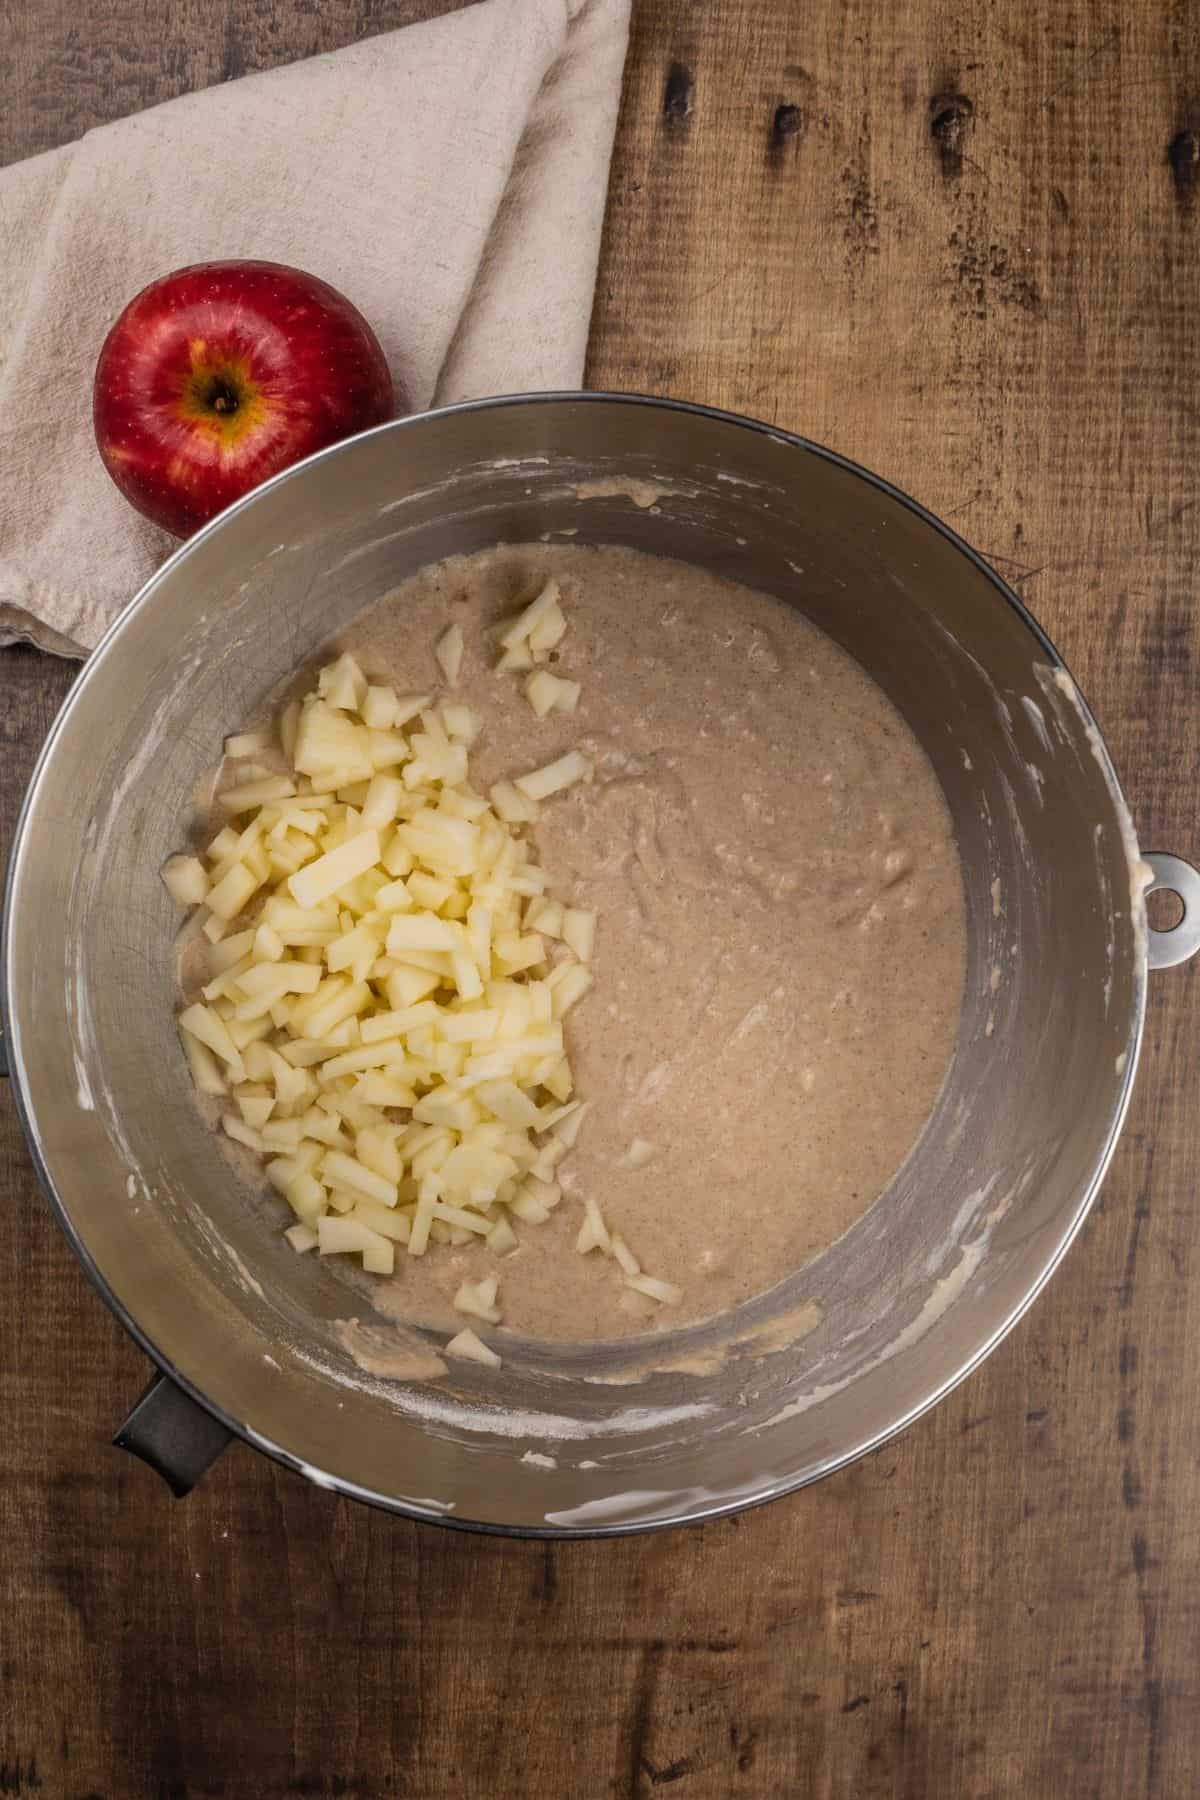 adding diced apple chunks to the apple cake batter in a silver mixing bowl on a wood table with an apple next to the bowl.